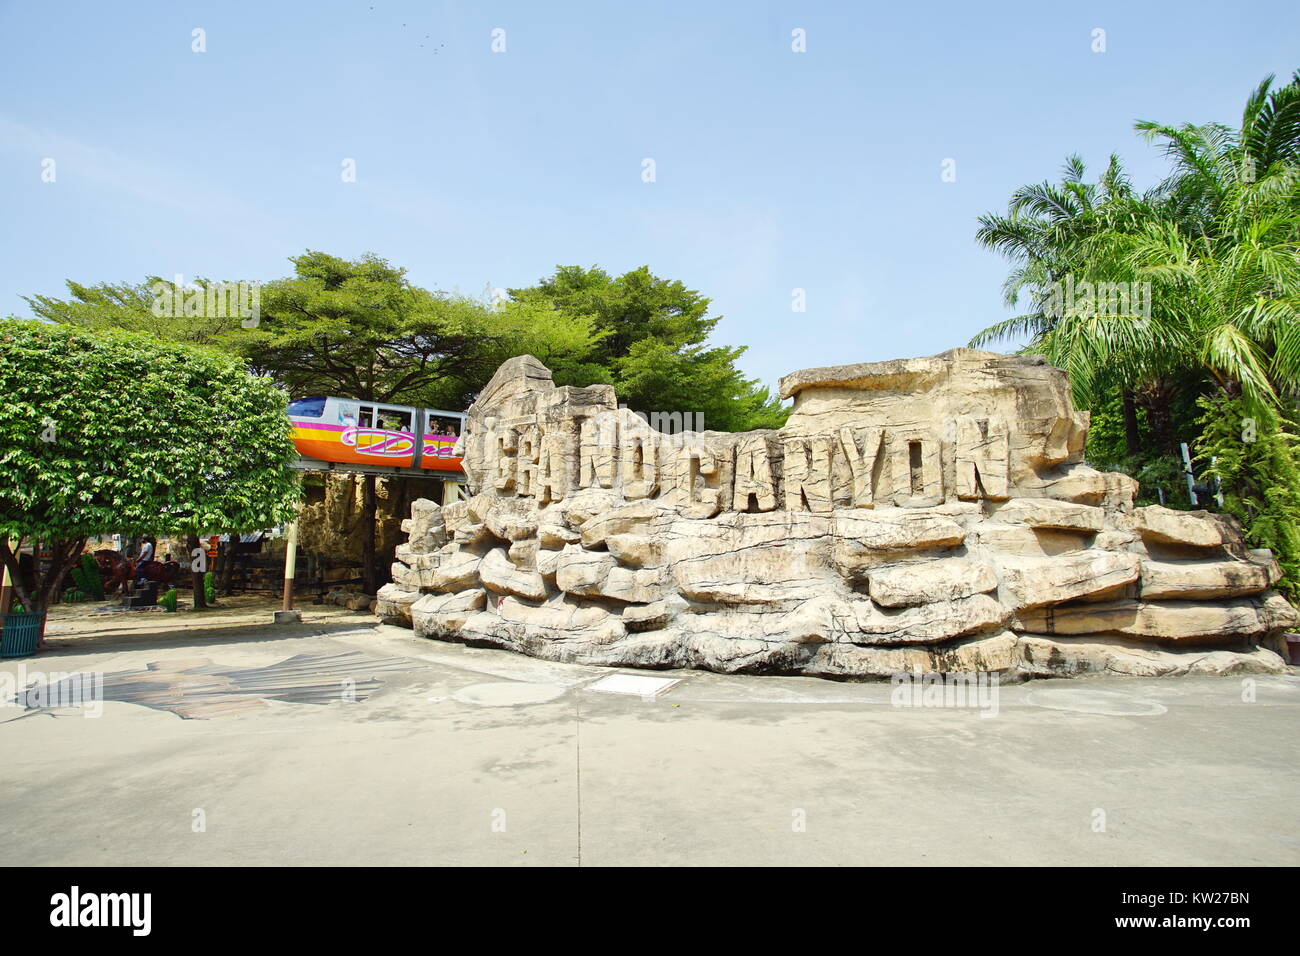 PATHUM THANI, THAILAND - November 04, 2017: Inside view of the fun park named Dream World in Pathum Thani, Thailand. It's the most popular amusement p Stock Photo